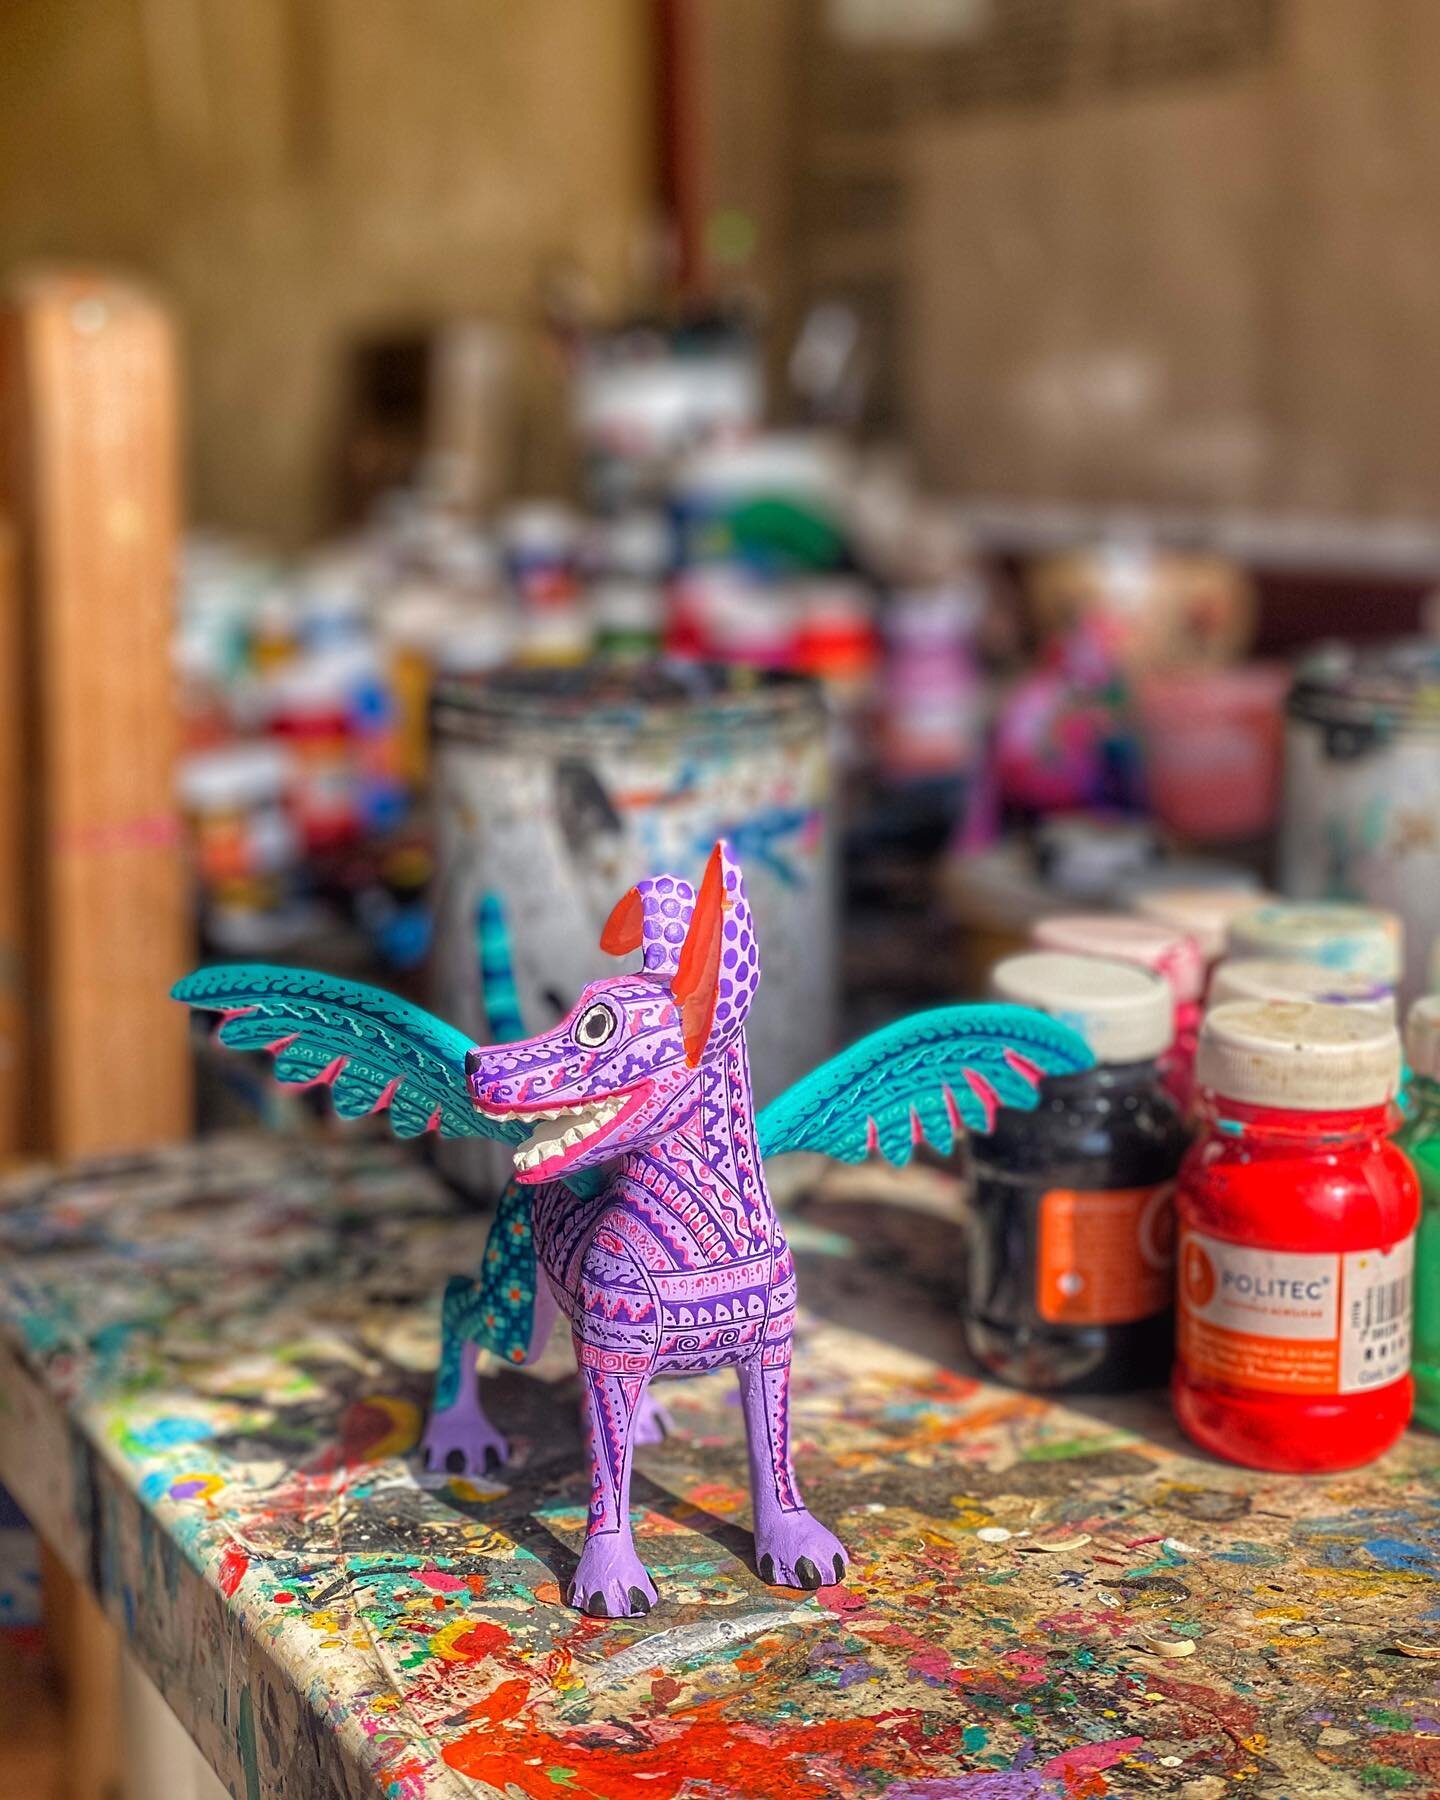 The colorful #fantastical #woodcarving creatures known as #alebrijes were inspired by an artist&rsquo;s fever dream. Learn more about our favorite #mexican #folkart #artepopular #handicraft. Link in bio. 

#travel #travelblogger #mexico🇲🇽 #oaxaca #